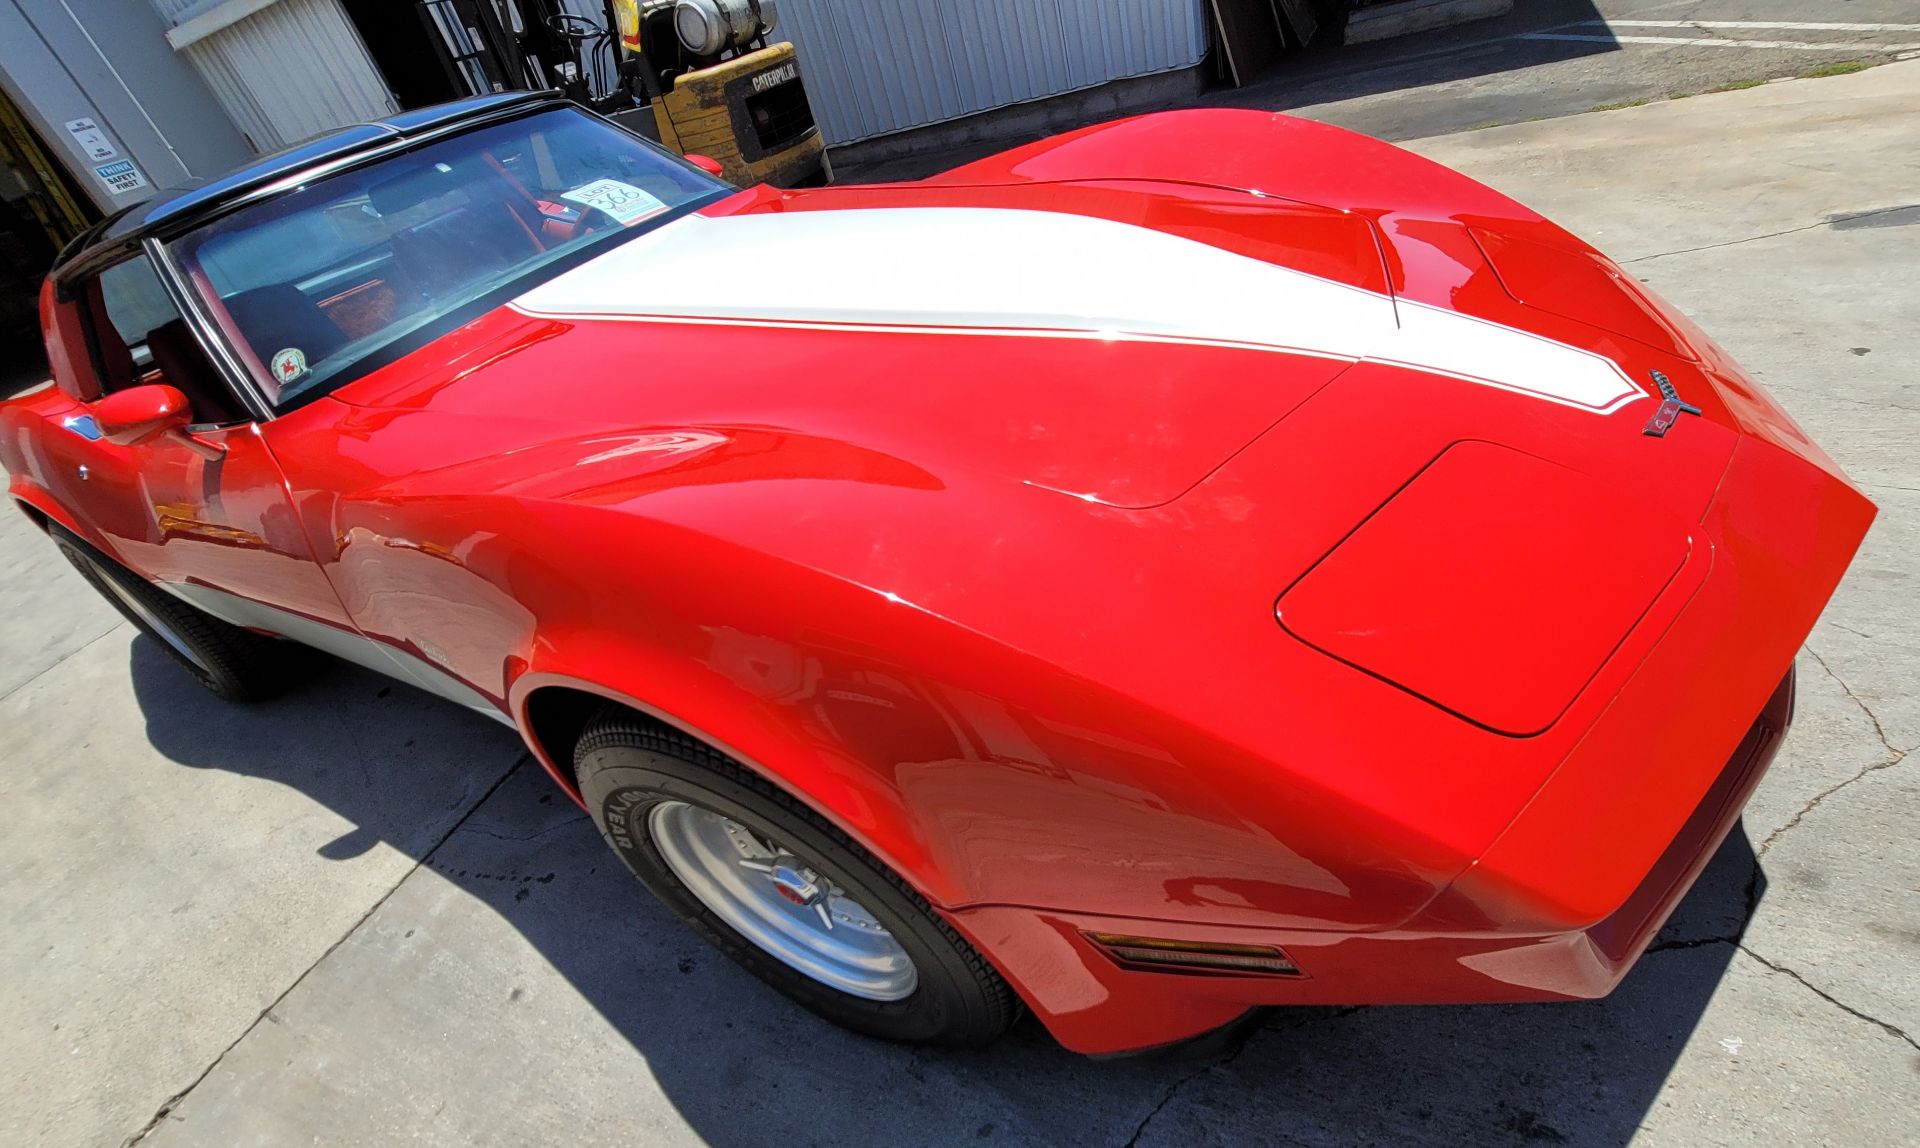 1980 CHEVROLET CORVETTE, WAS VIC EDELBROCK'S PERSONAL CAR BOUGHT FOR R&D, RED INTERIOR, TITLE ONLY. - Image 52 of 70